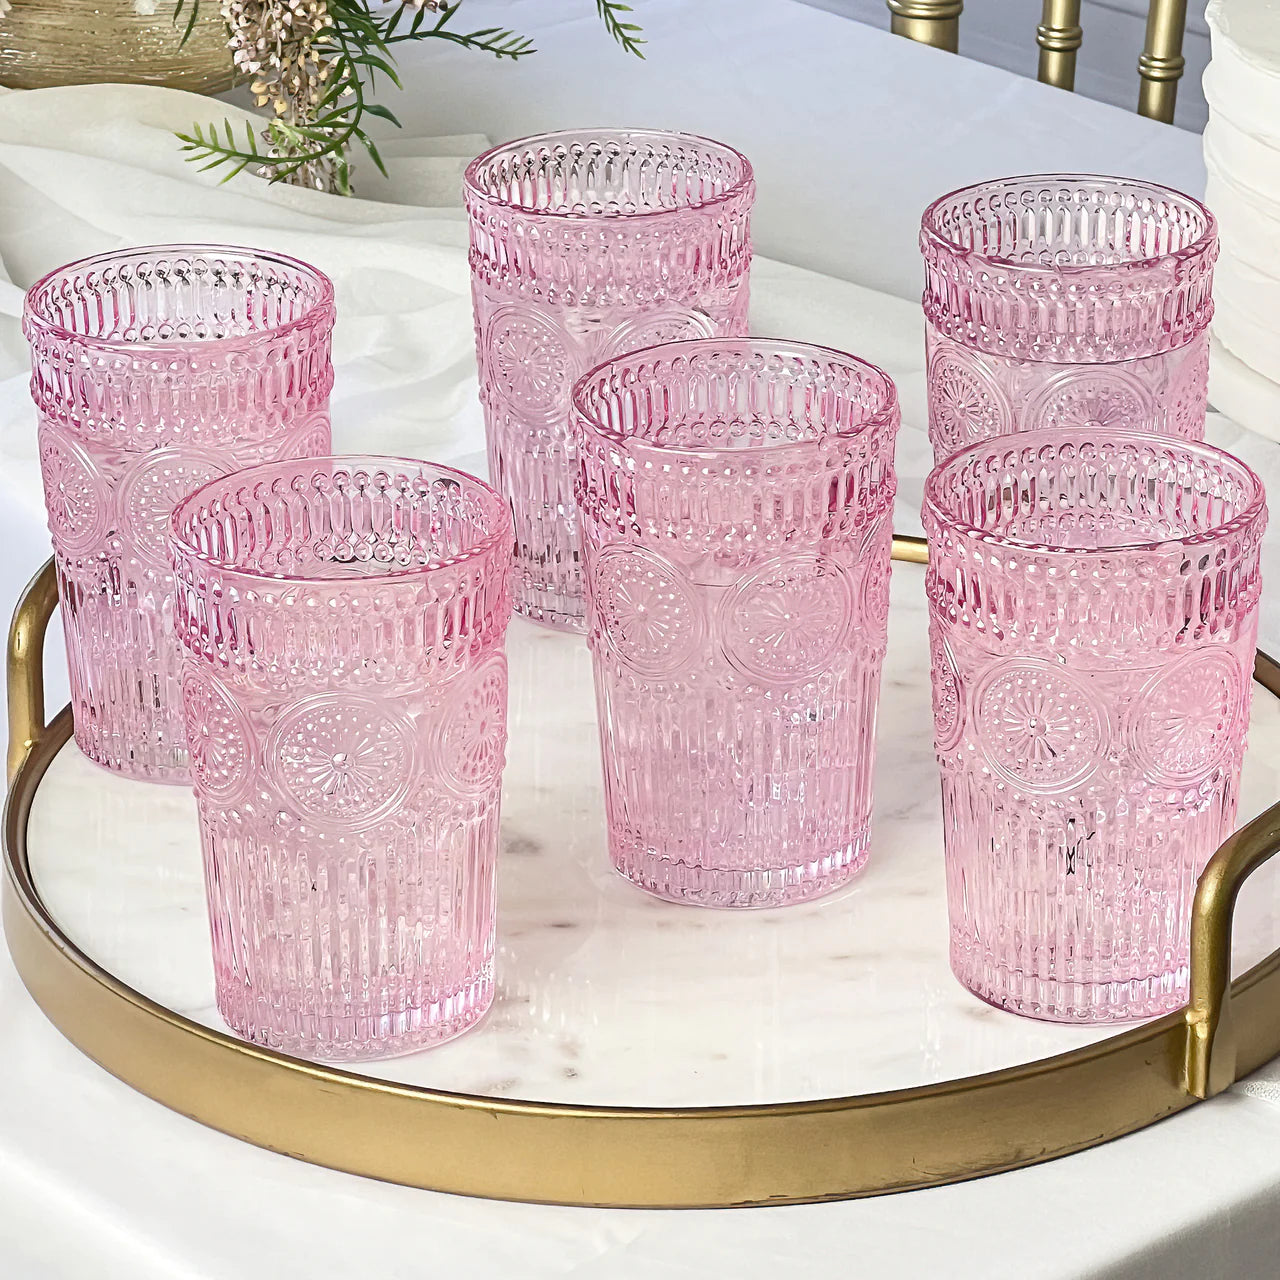 Vintage Textured Pink Striped Drinking Glasses (Set of 6) - 13 oz Ribbed Glassware with Flower Design| Cocktail Set, Juice Glass, Water Cups, Kitchen Glasses